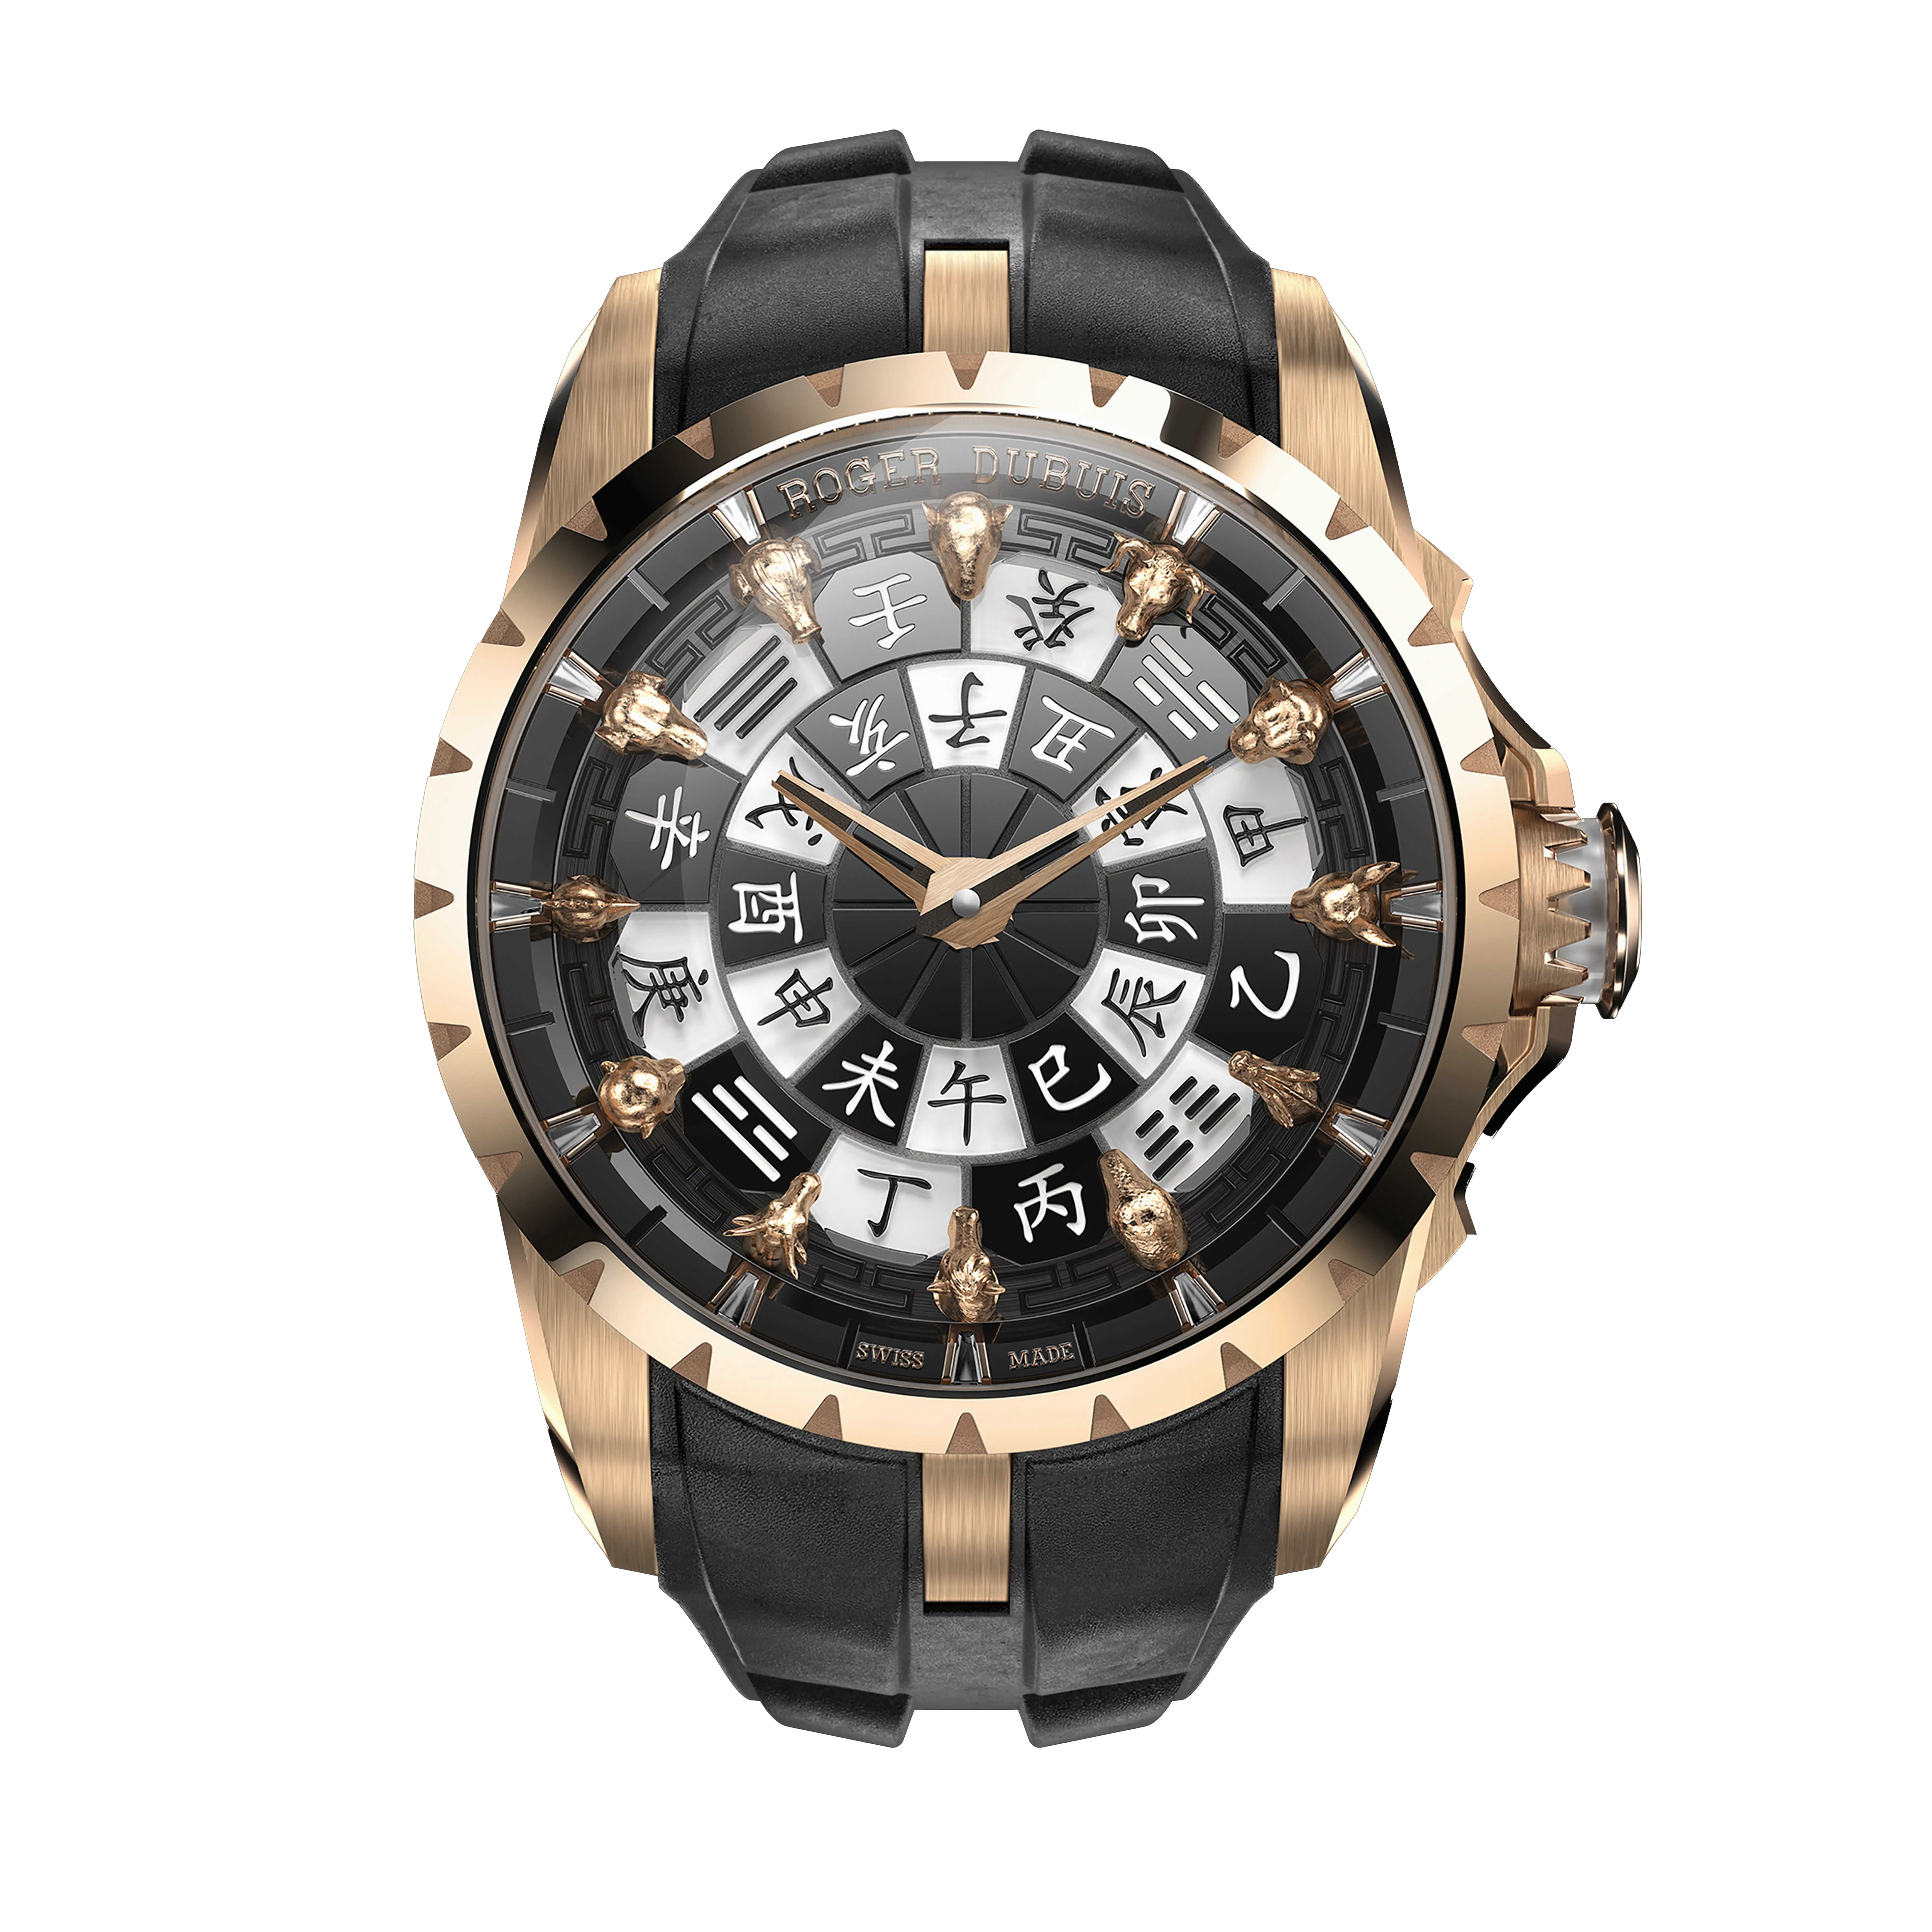 Roger Dubuis KNIGHTS OF THE ROUND TABLE CHINESE ZODIAC DBEX0973 Pink Gold 18K, Automatic, self-winding, 45mm